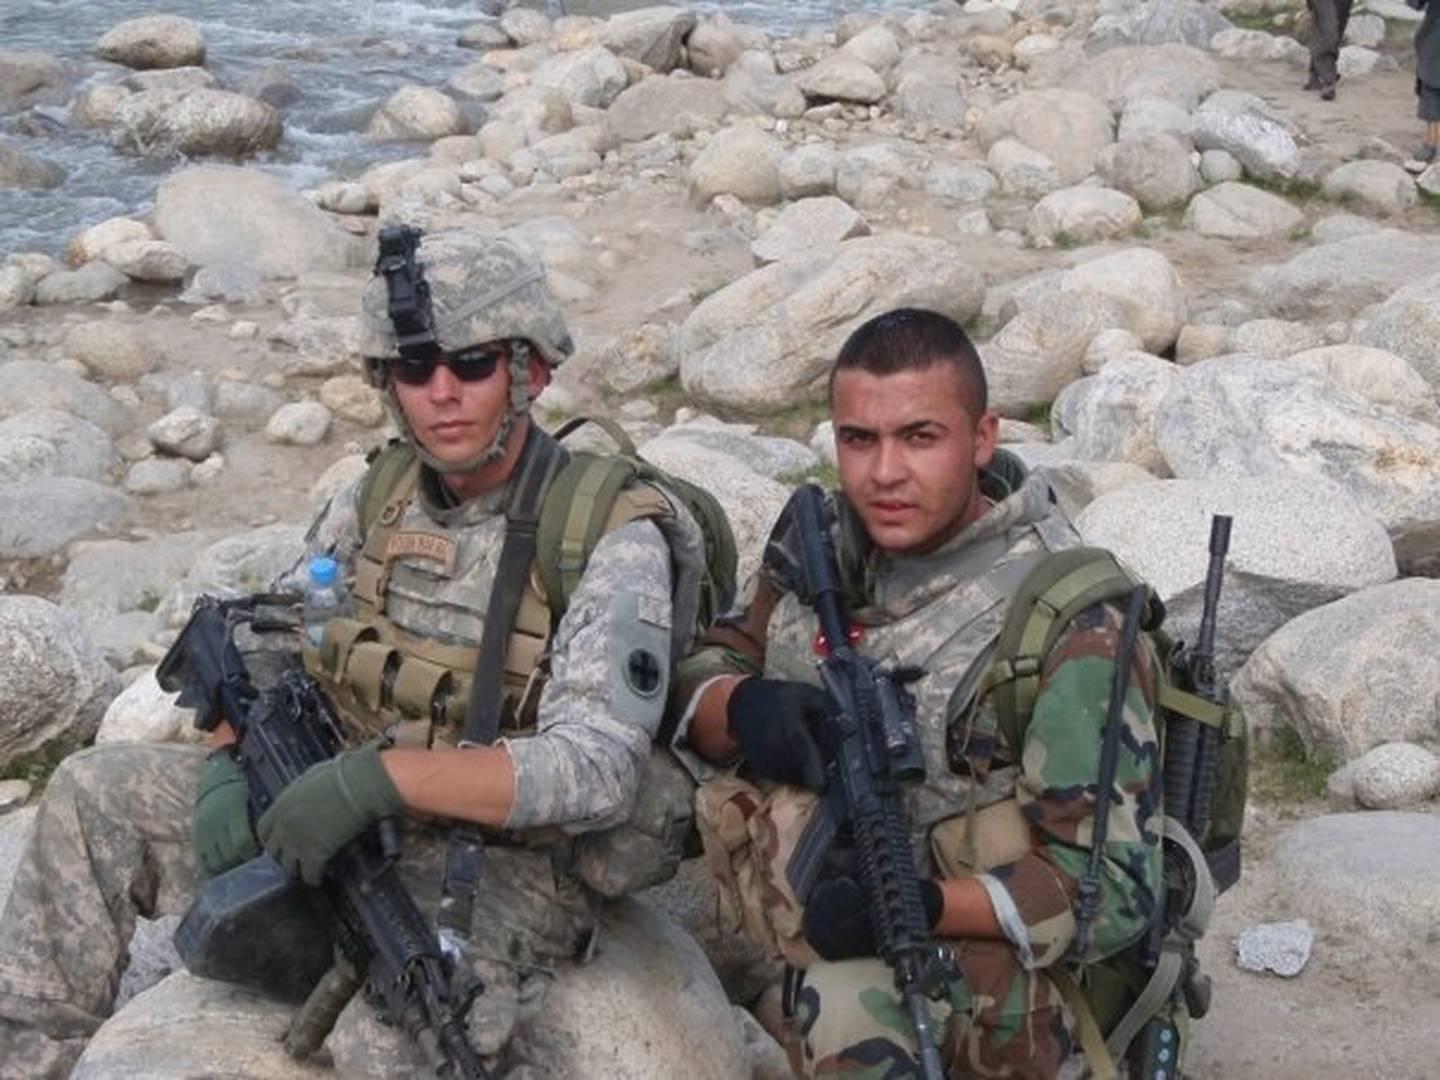 Marine Cpl. Jason Essazay on patrol with the Army in Afghanistan in 2008, taken while he was still working as an interpreter. (Cpl. Jason Essazay) How the family of an interpreter turned US Marine escaped Afghanistan